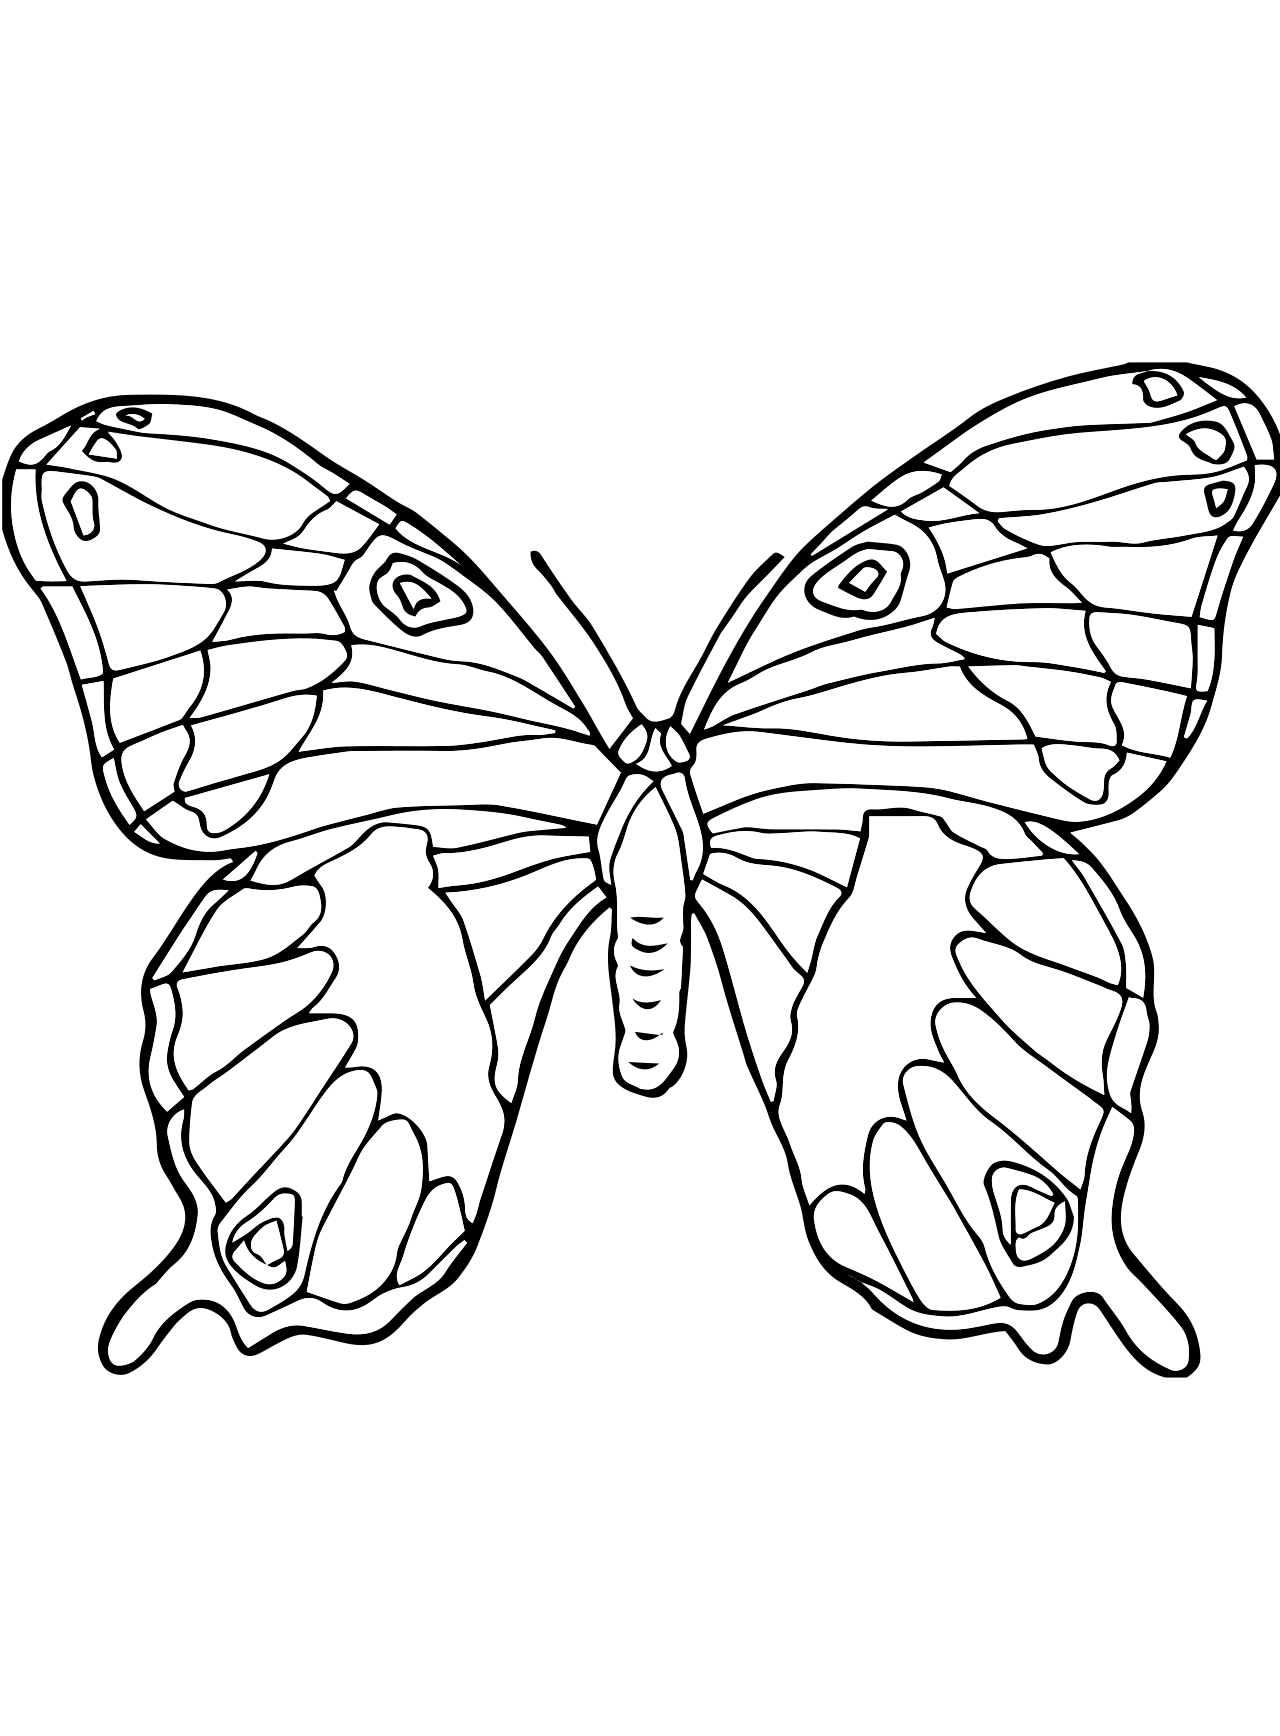 Kids-n-fun.com | Create personal coloring page of Butterflies coloring page